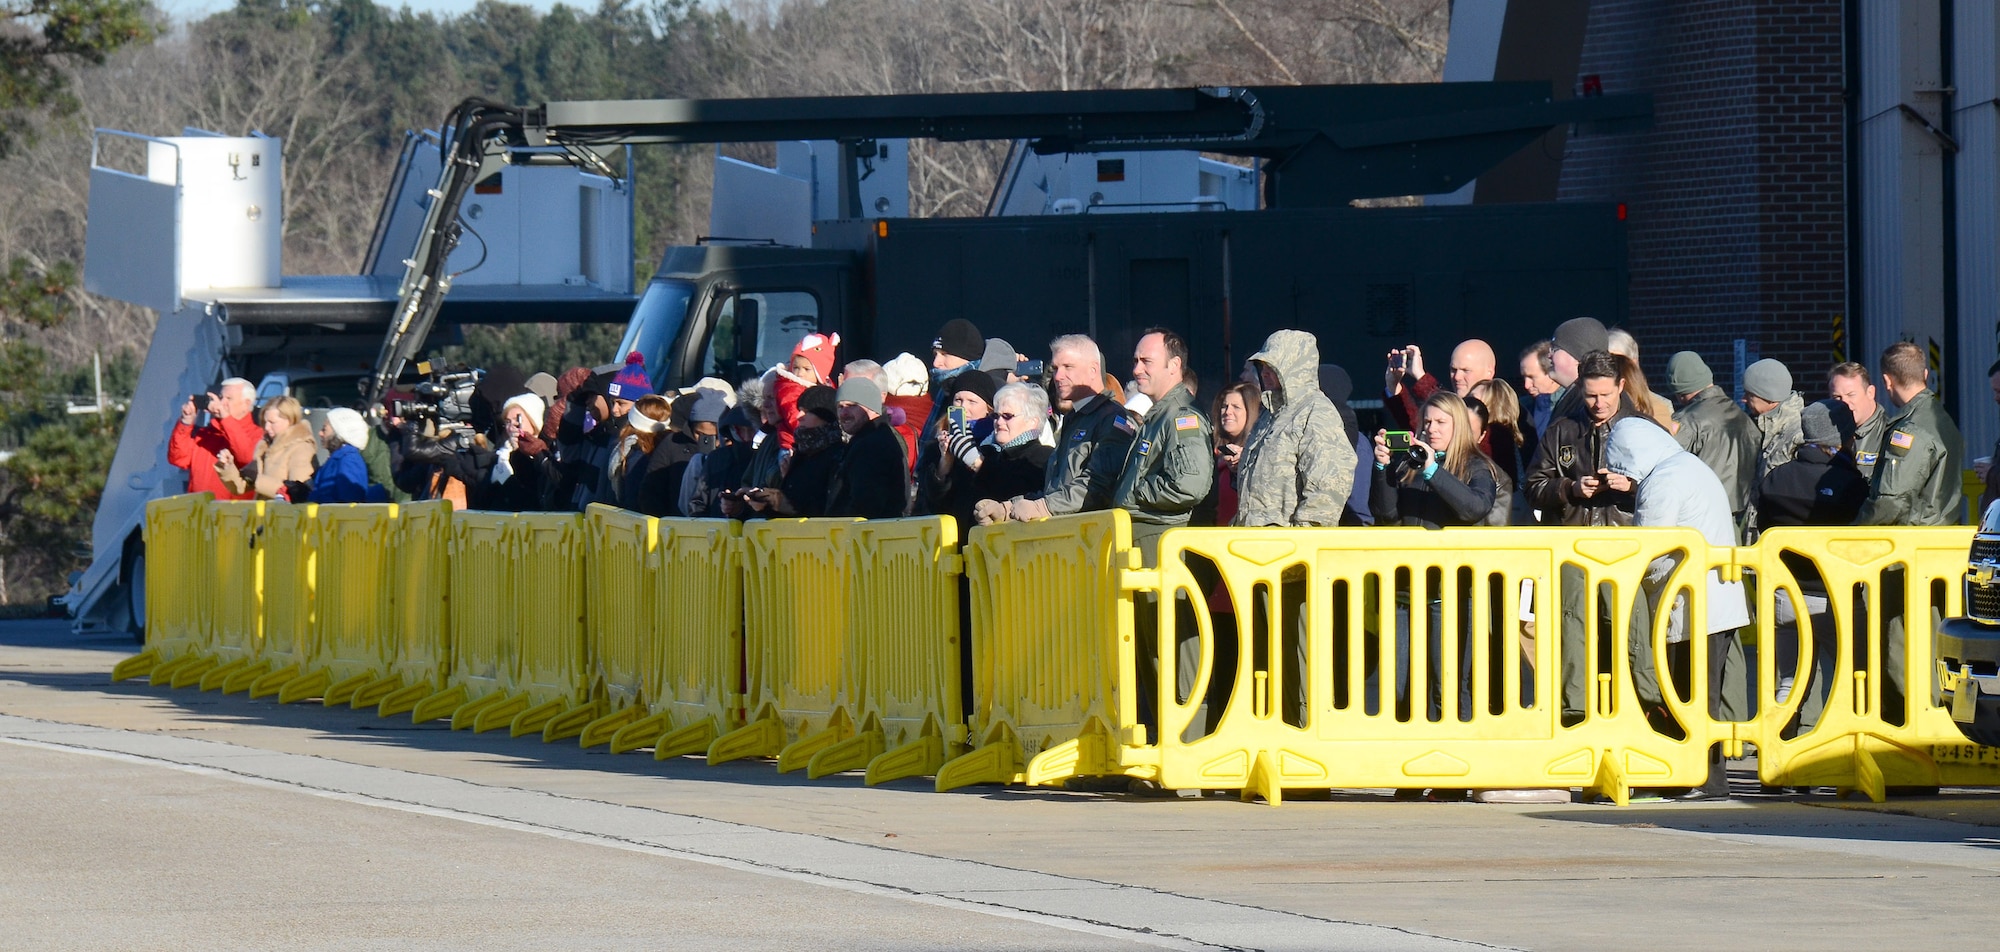 Family and friends assemble to watch 94th Airlift Wing personnel depart on their deployment to Southwest Asia, at Dobbins Air Reserve Base, Ga., Jan. 8, 2015. (U.S. Air Force photo/Brad Fallin)